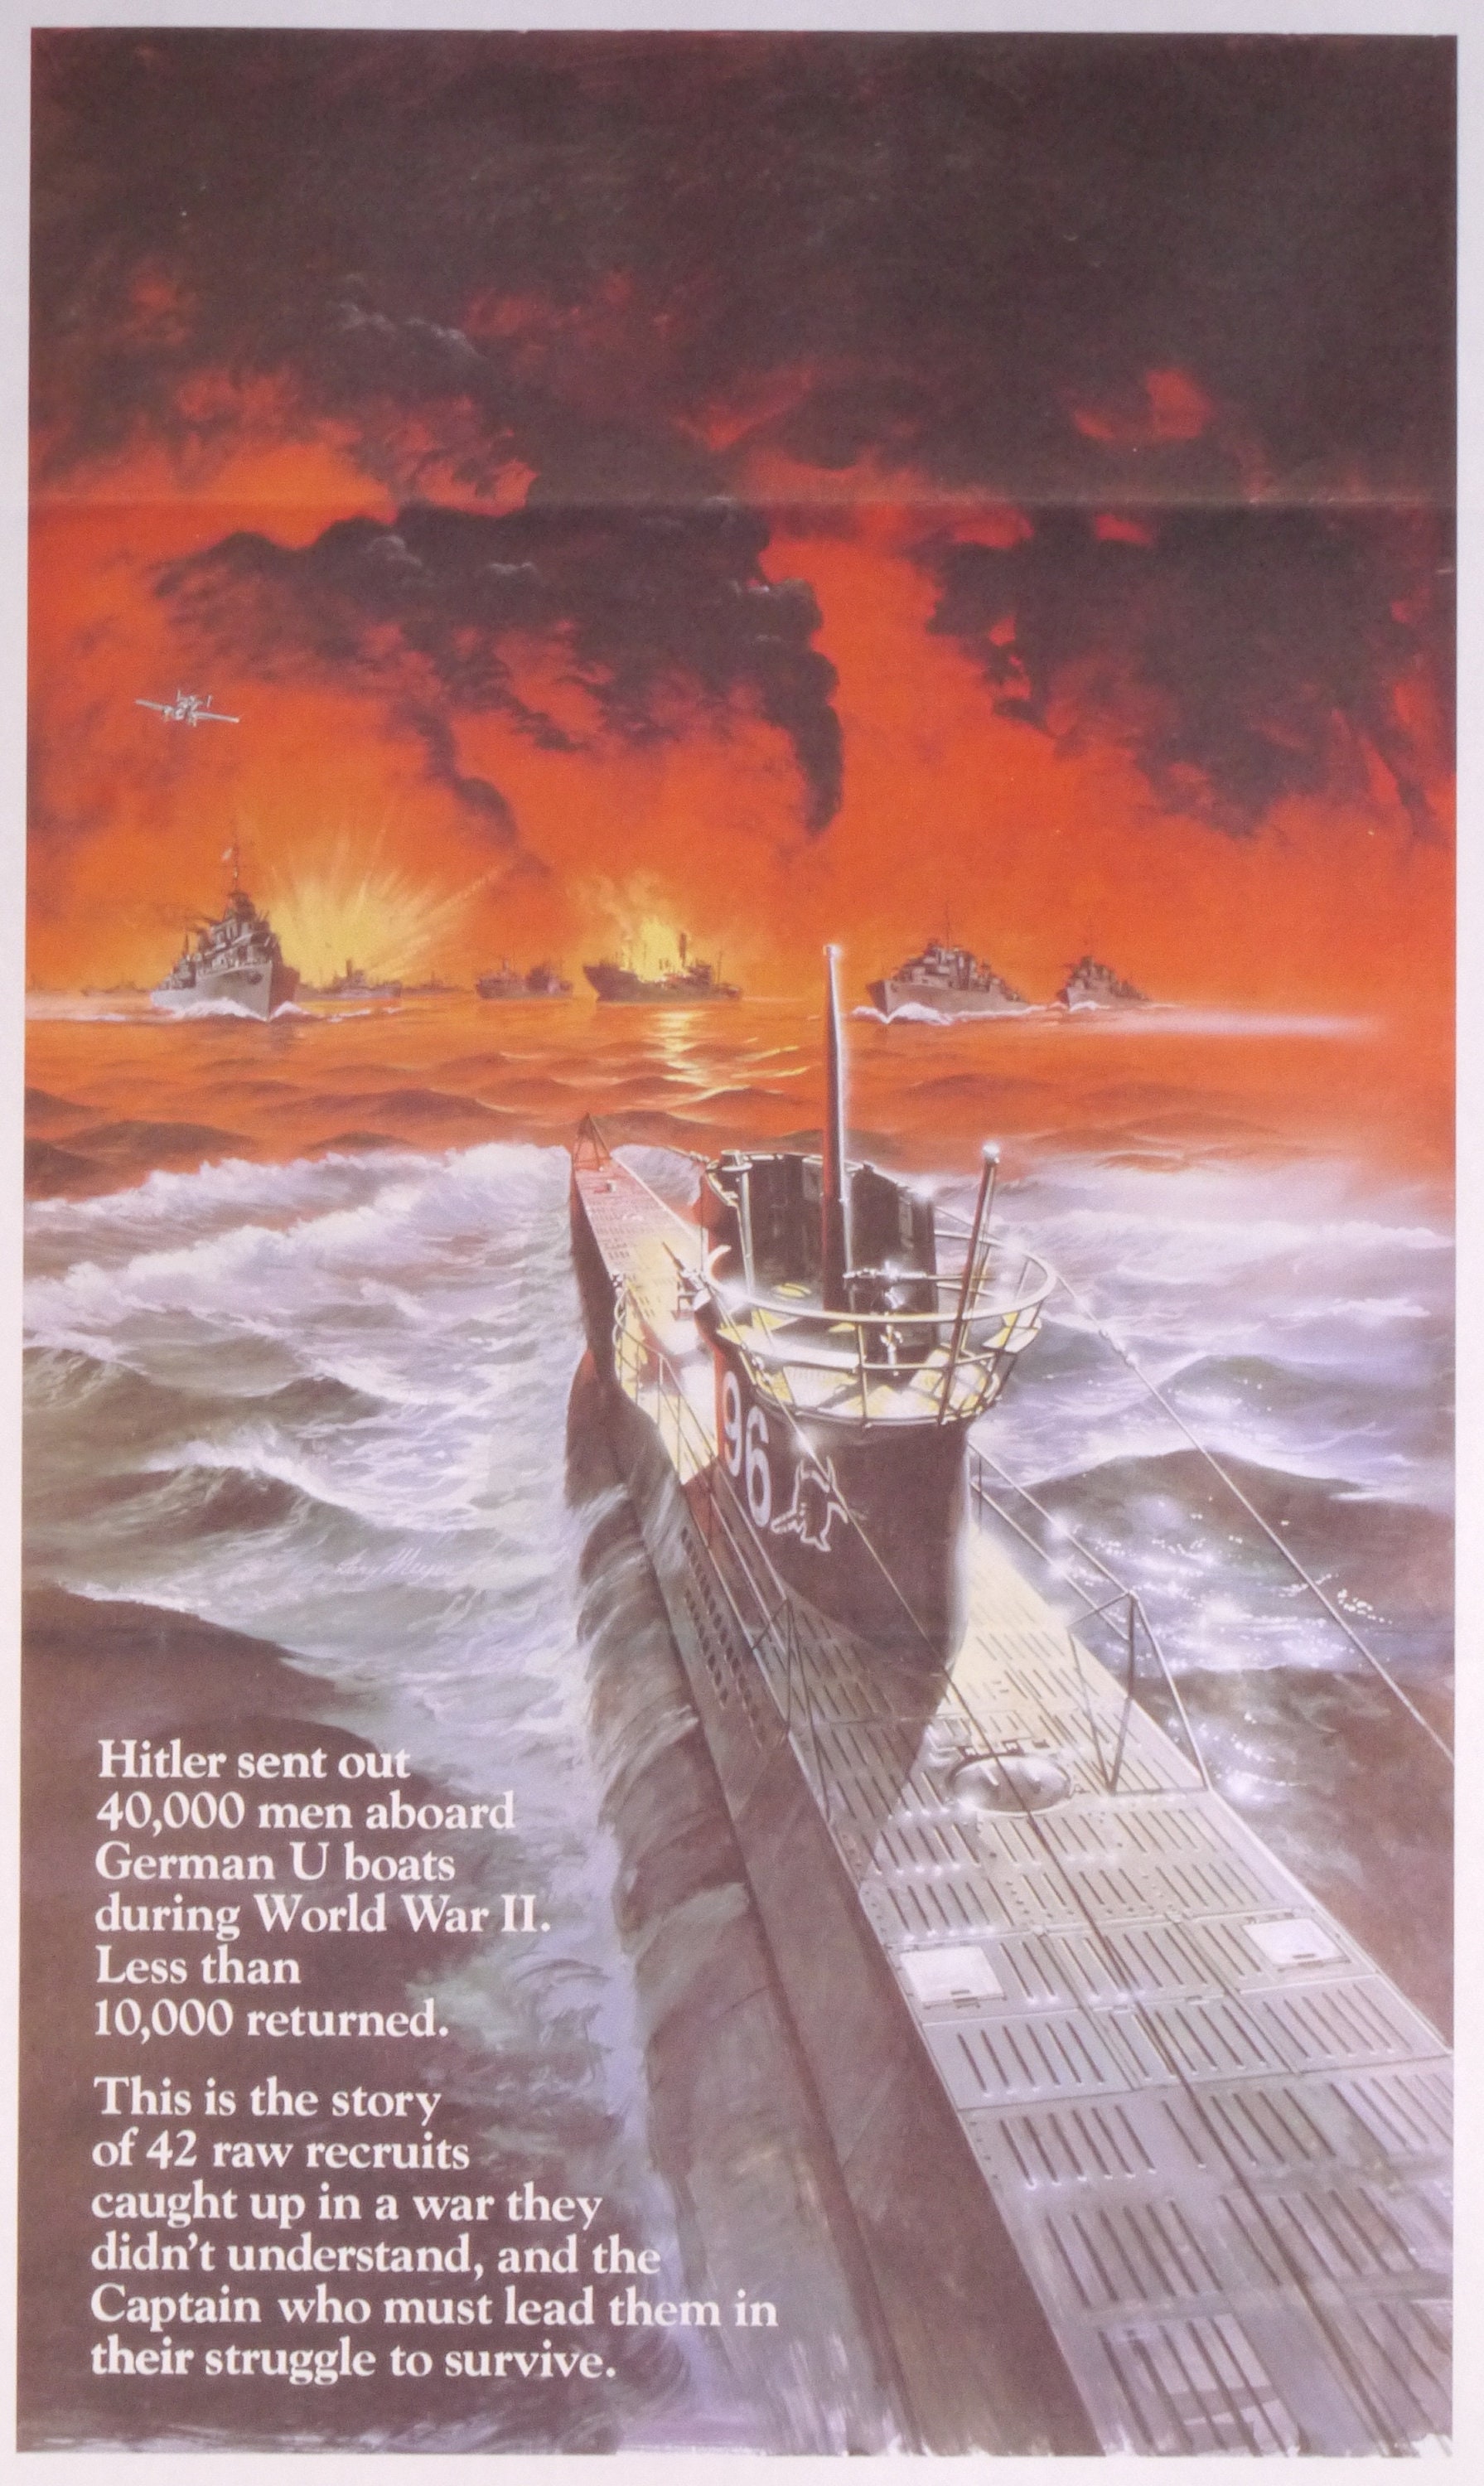 Das Boot-an Original Vintage Movie Poster for Wolfgang Petersen's Story of  German Wolf Pack Submariners With Jürgen Prochnow and Erwin Leder 